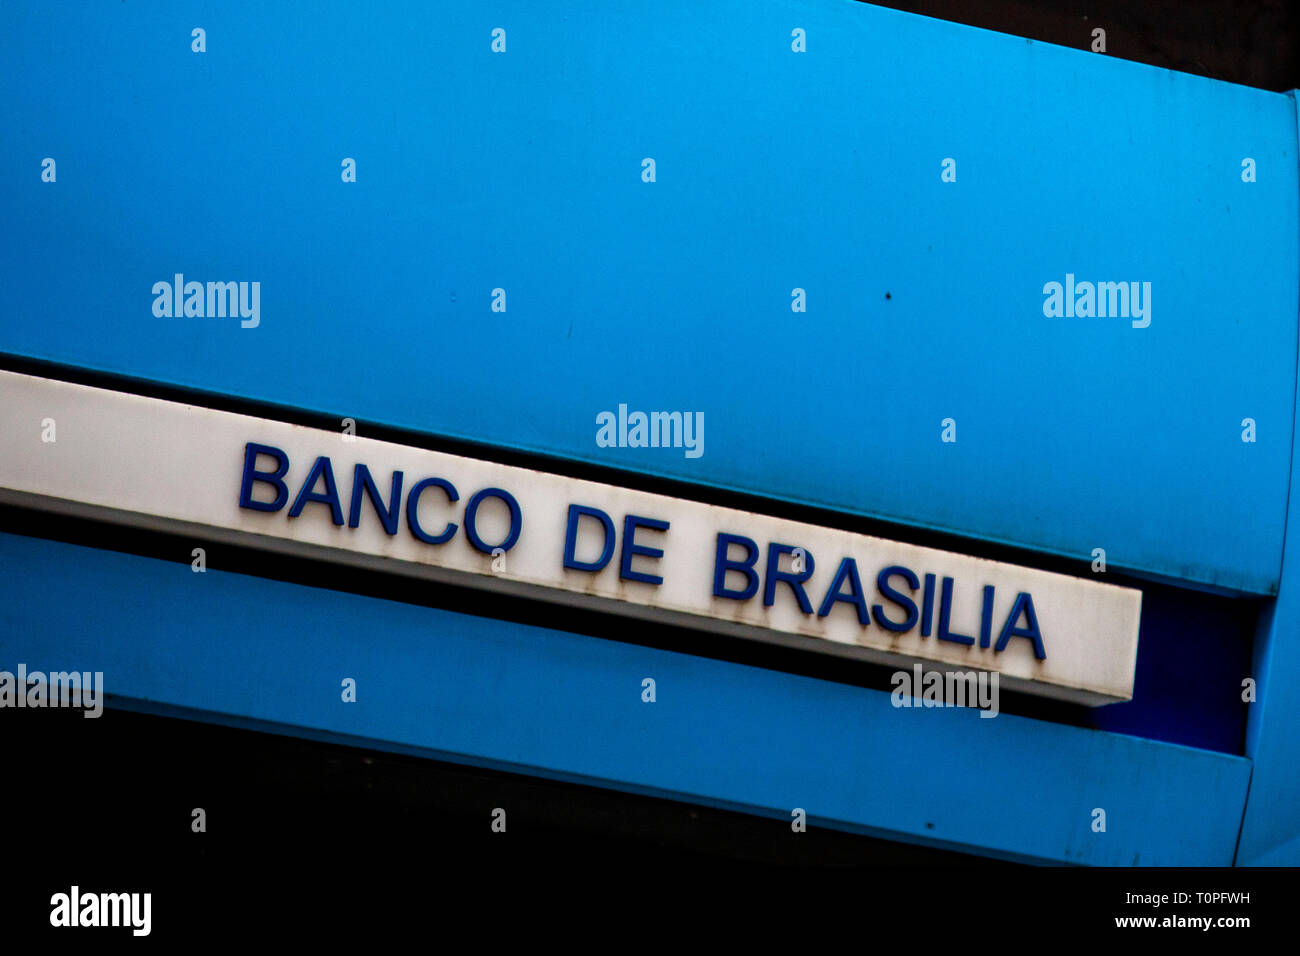 SP - Sao Paulo - 03/21/2019 - Bank of Brasilia Facade Sao Paulo - Facade of Banco de Brasilia in Jose Bonifacio street downtown of Sao Paulo. The bank and target of Operation Circus Maximus whose second phase was launched on the morning of Thursday 21, the operation aims to disrupt a supposed criminal organization installed in the BRB since 2014. Photo: Suamy Beydoun / AGIF Stock Photo